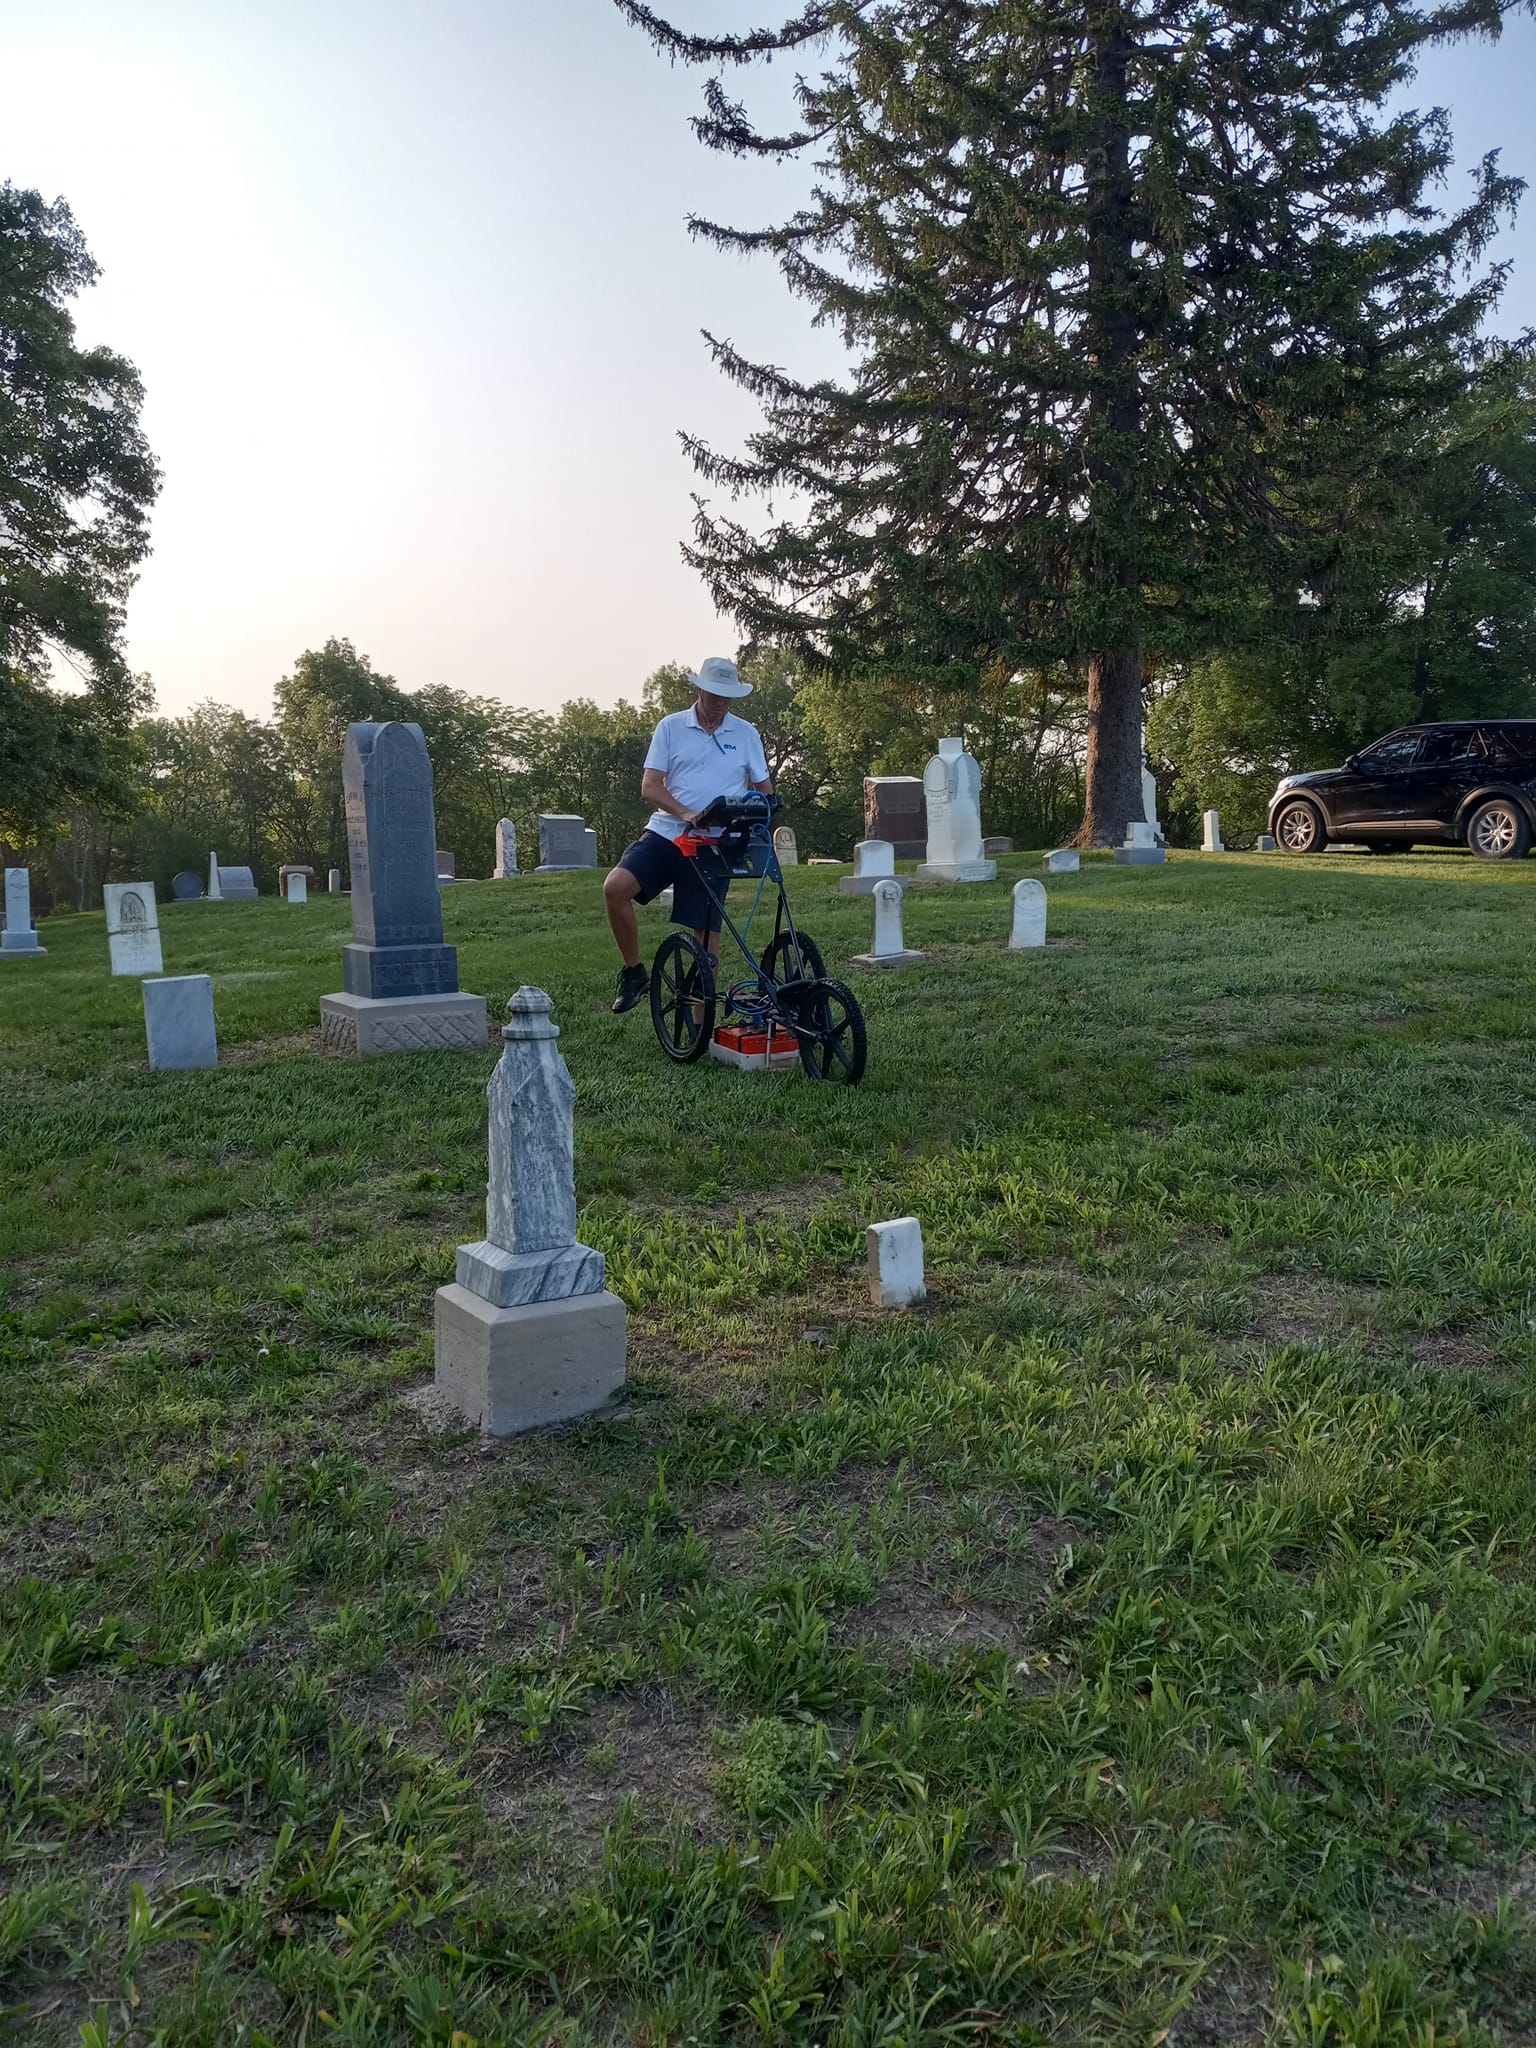 Recalibrating after backing up at Indian Valley Cemetery.